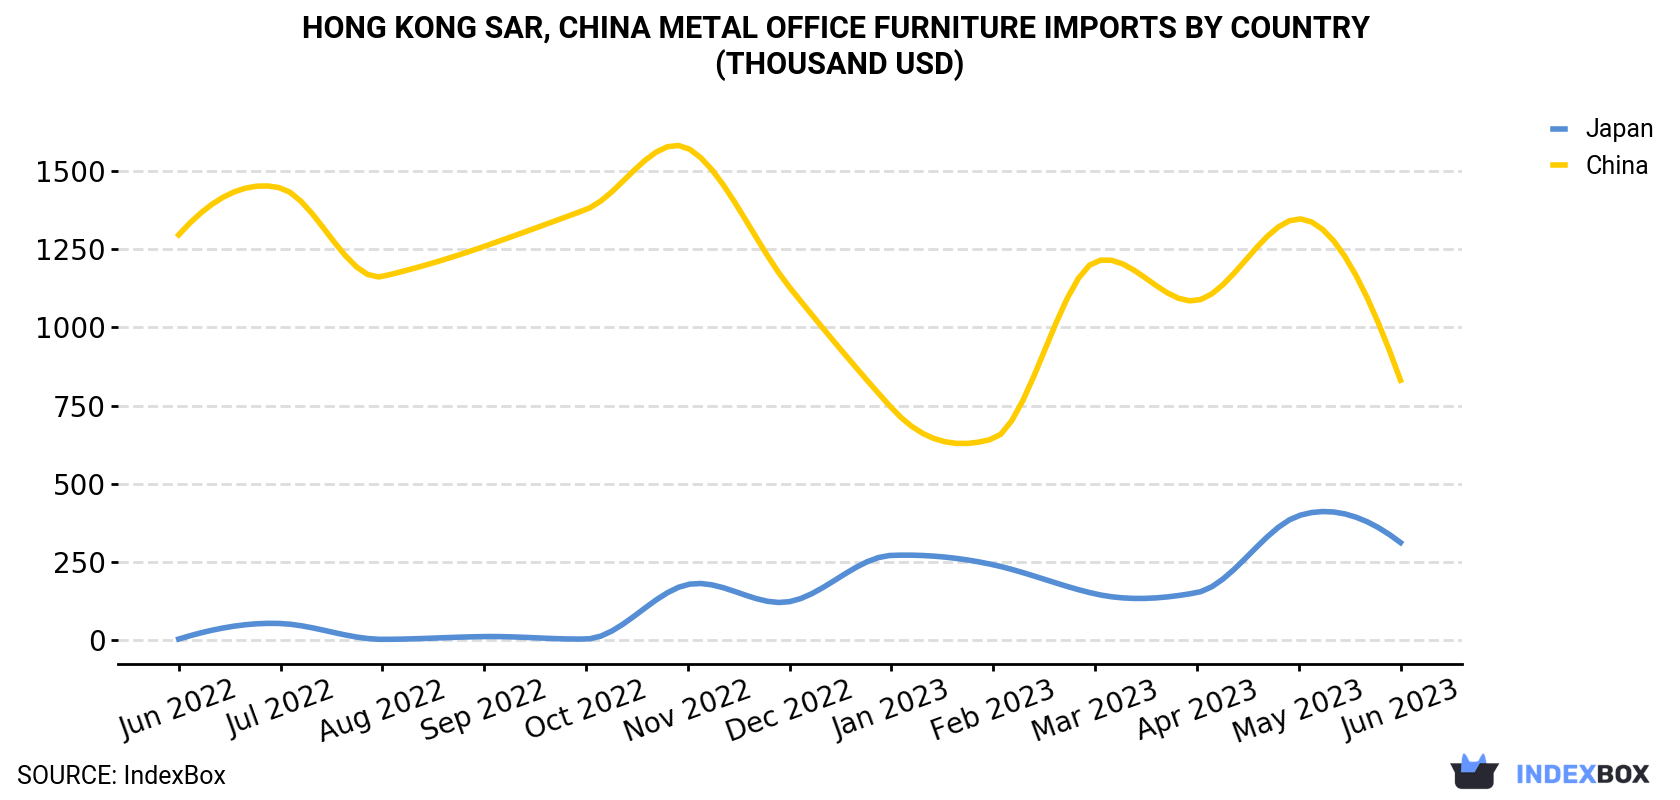 Hong Kong Metal Office Furniture Imports By Country (Thousand USD)